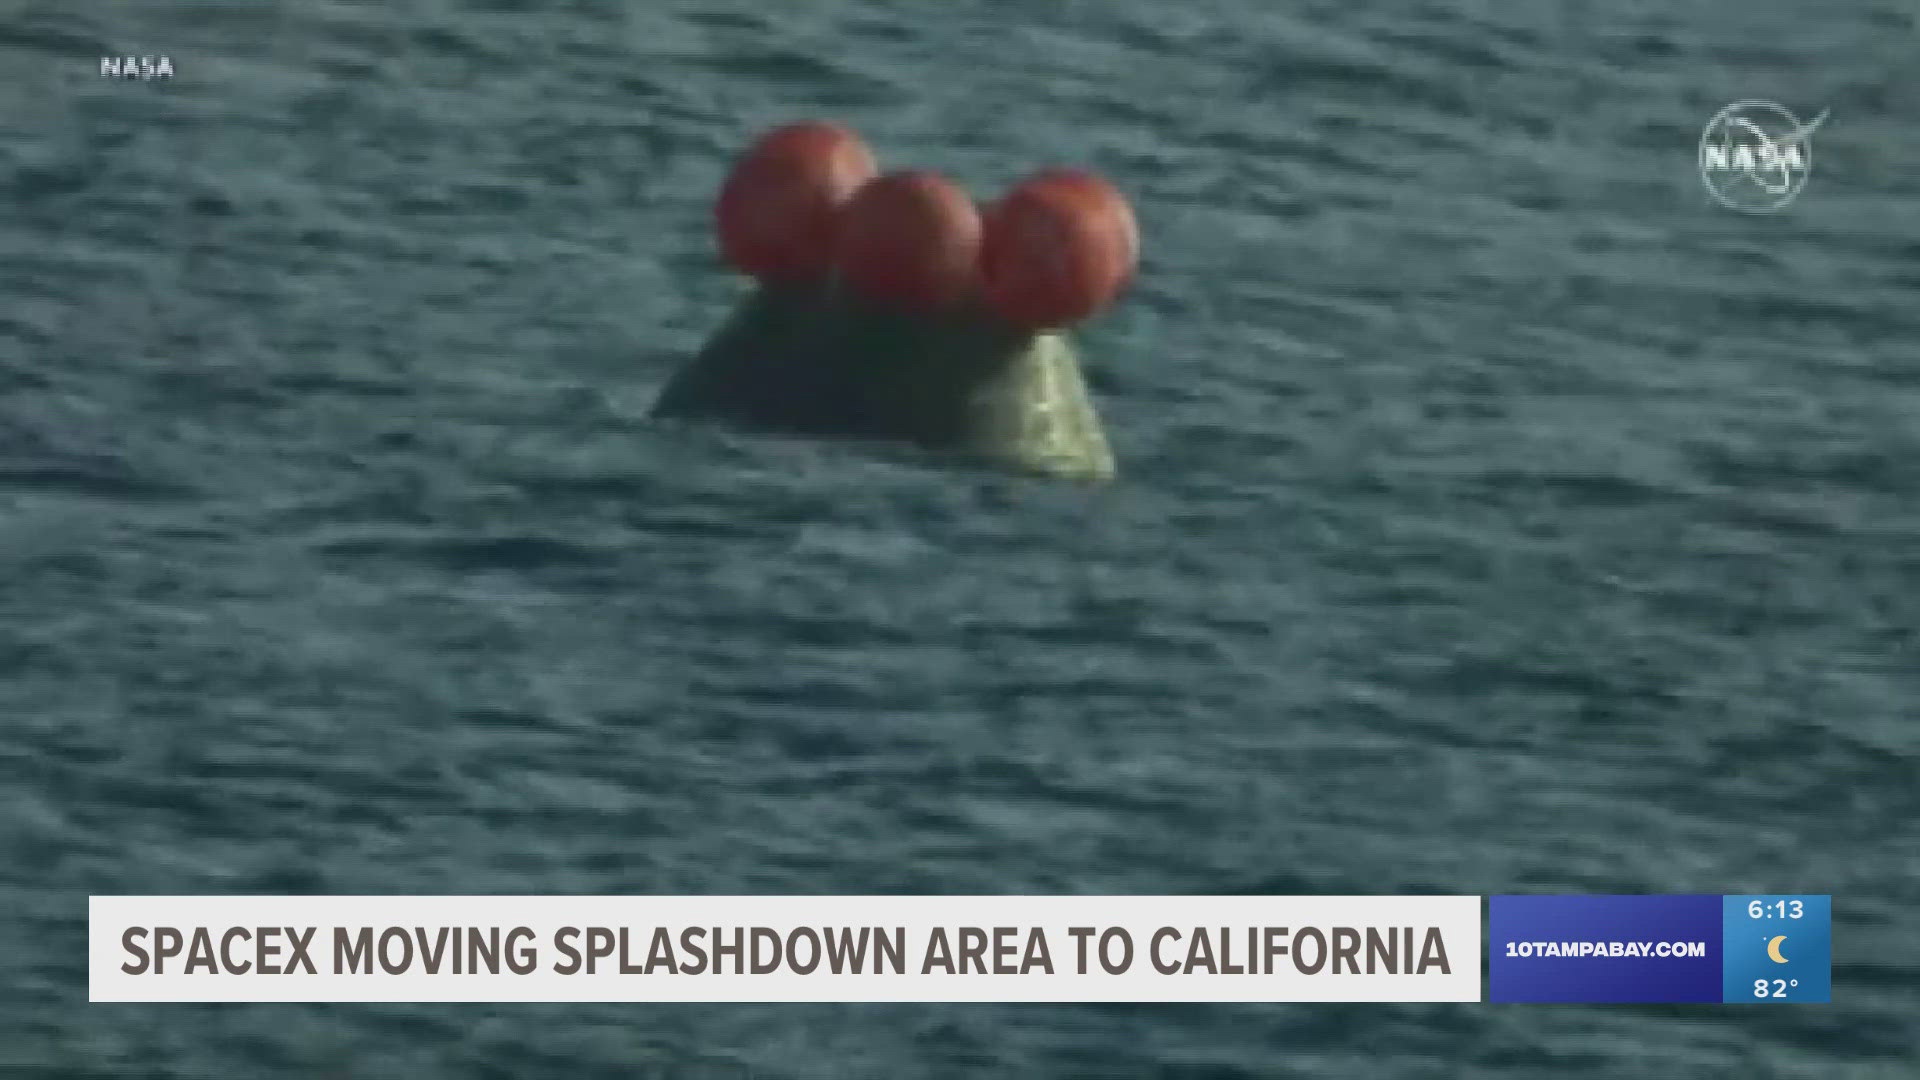 The splashdown location will be moved to prevent debris from falling in areas where people or buildings might be.